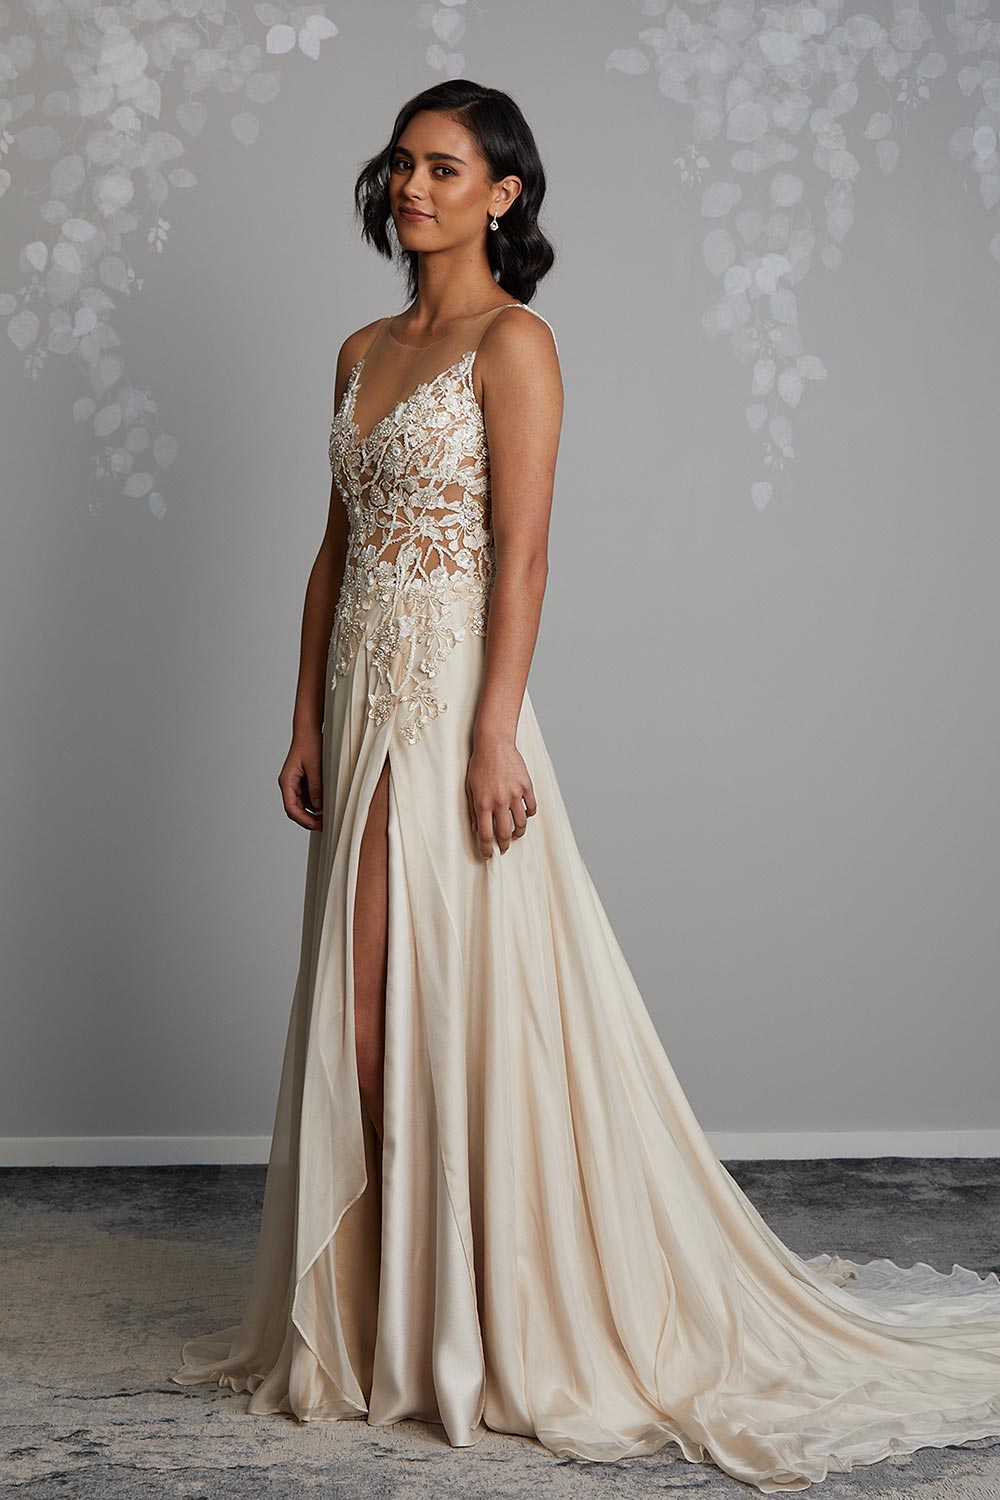 Champagne Silk wedding gown. Semi sheer bodice with beaded botanical lace, dainty pearls & sequins. Flowing chiffon skirt with front split, V-neck, low V-back and short train. Vinka Design Auckland, NZ